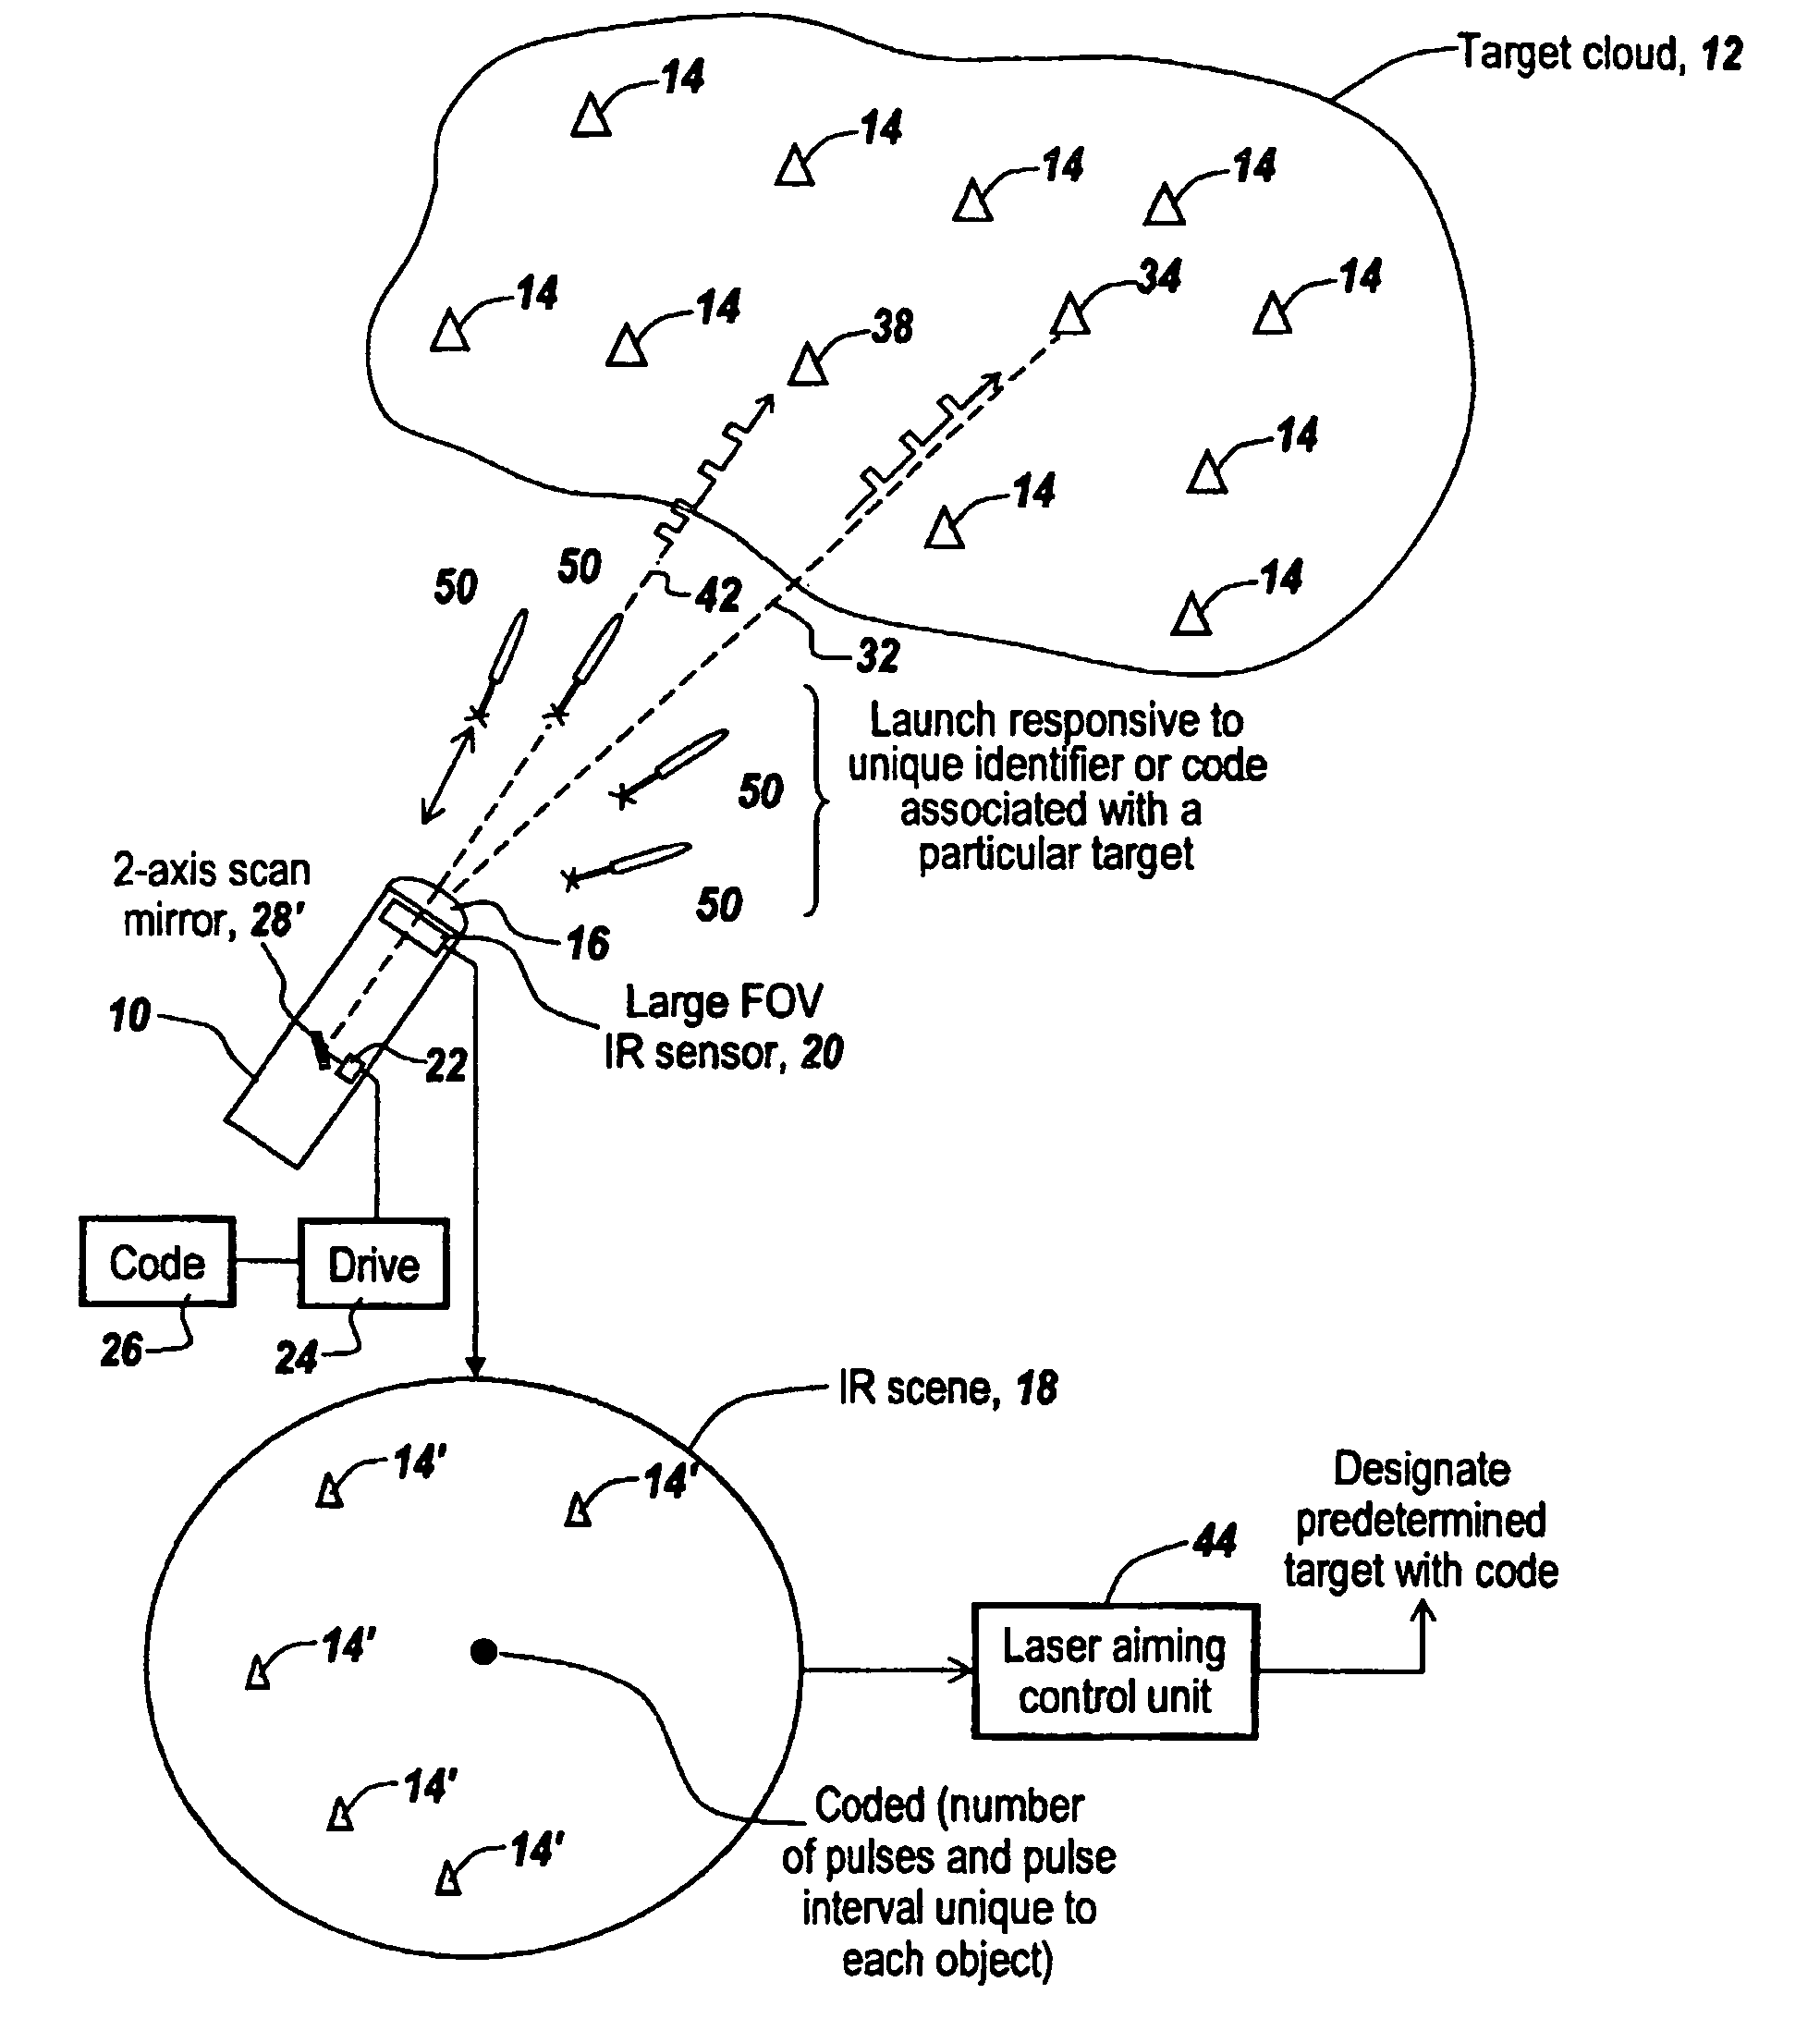 Method and apparatus for efficiently targeting multiple re-entry vehicles with multiple kill vehicles